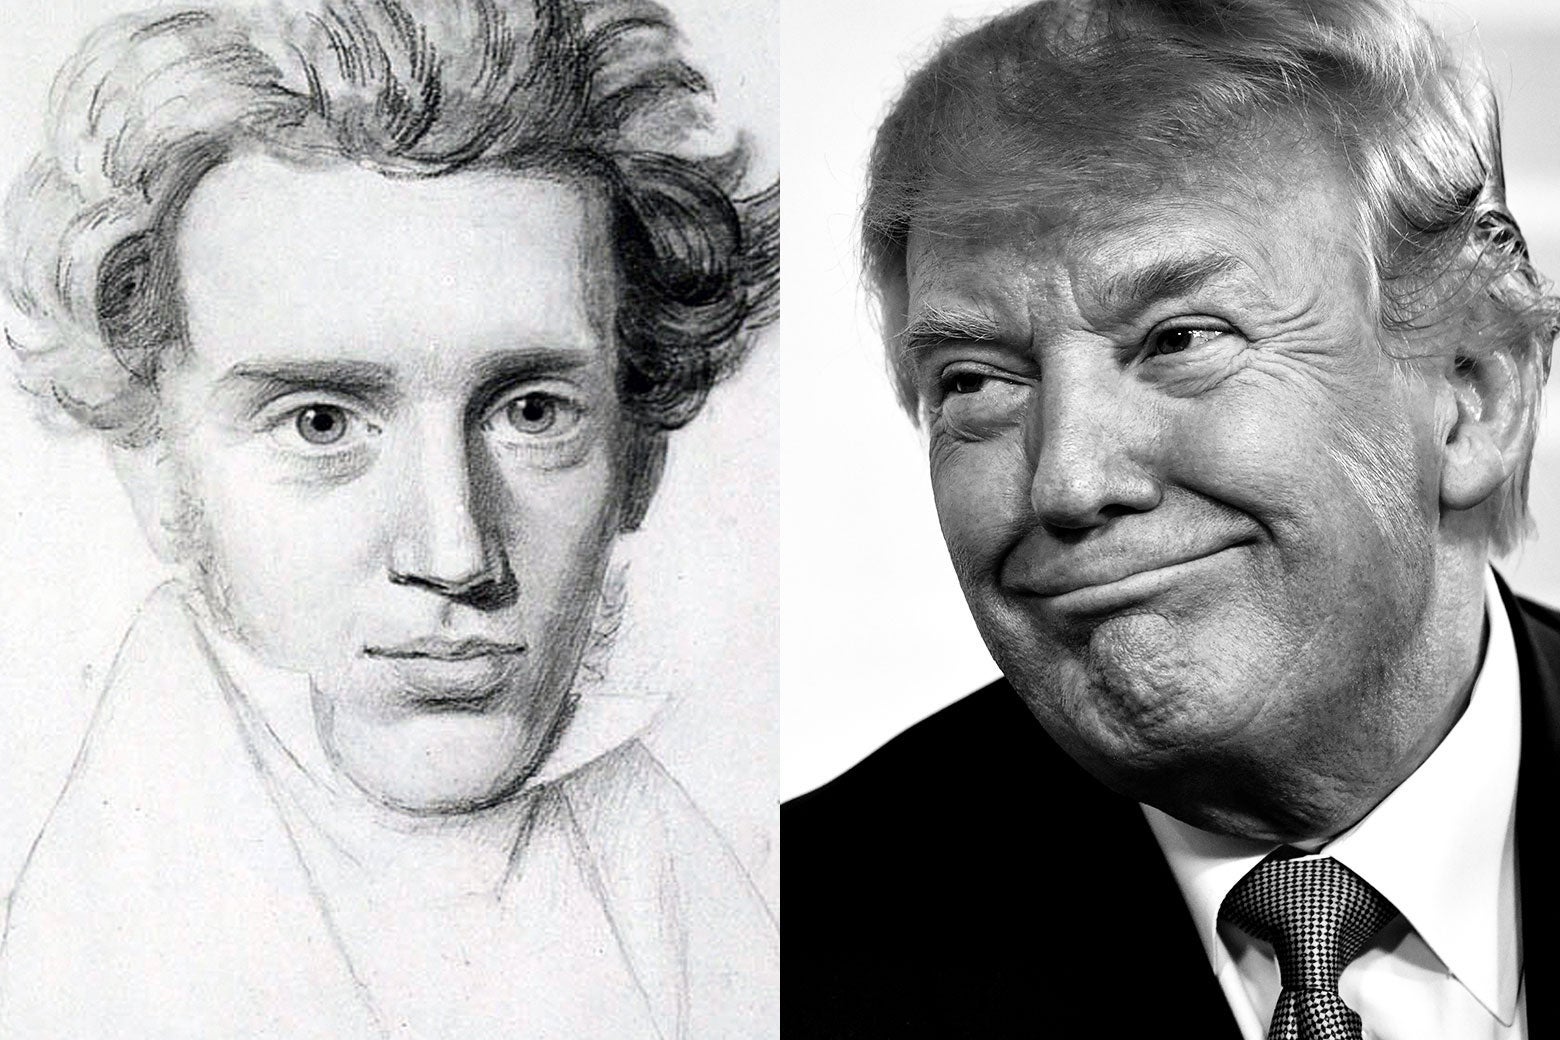 Side-by-side of a sketch of Kierkegaard and a photo of Trump